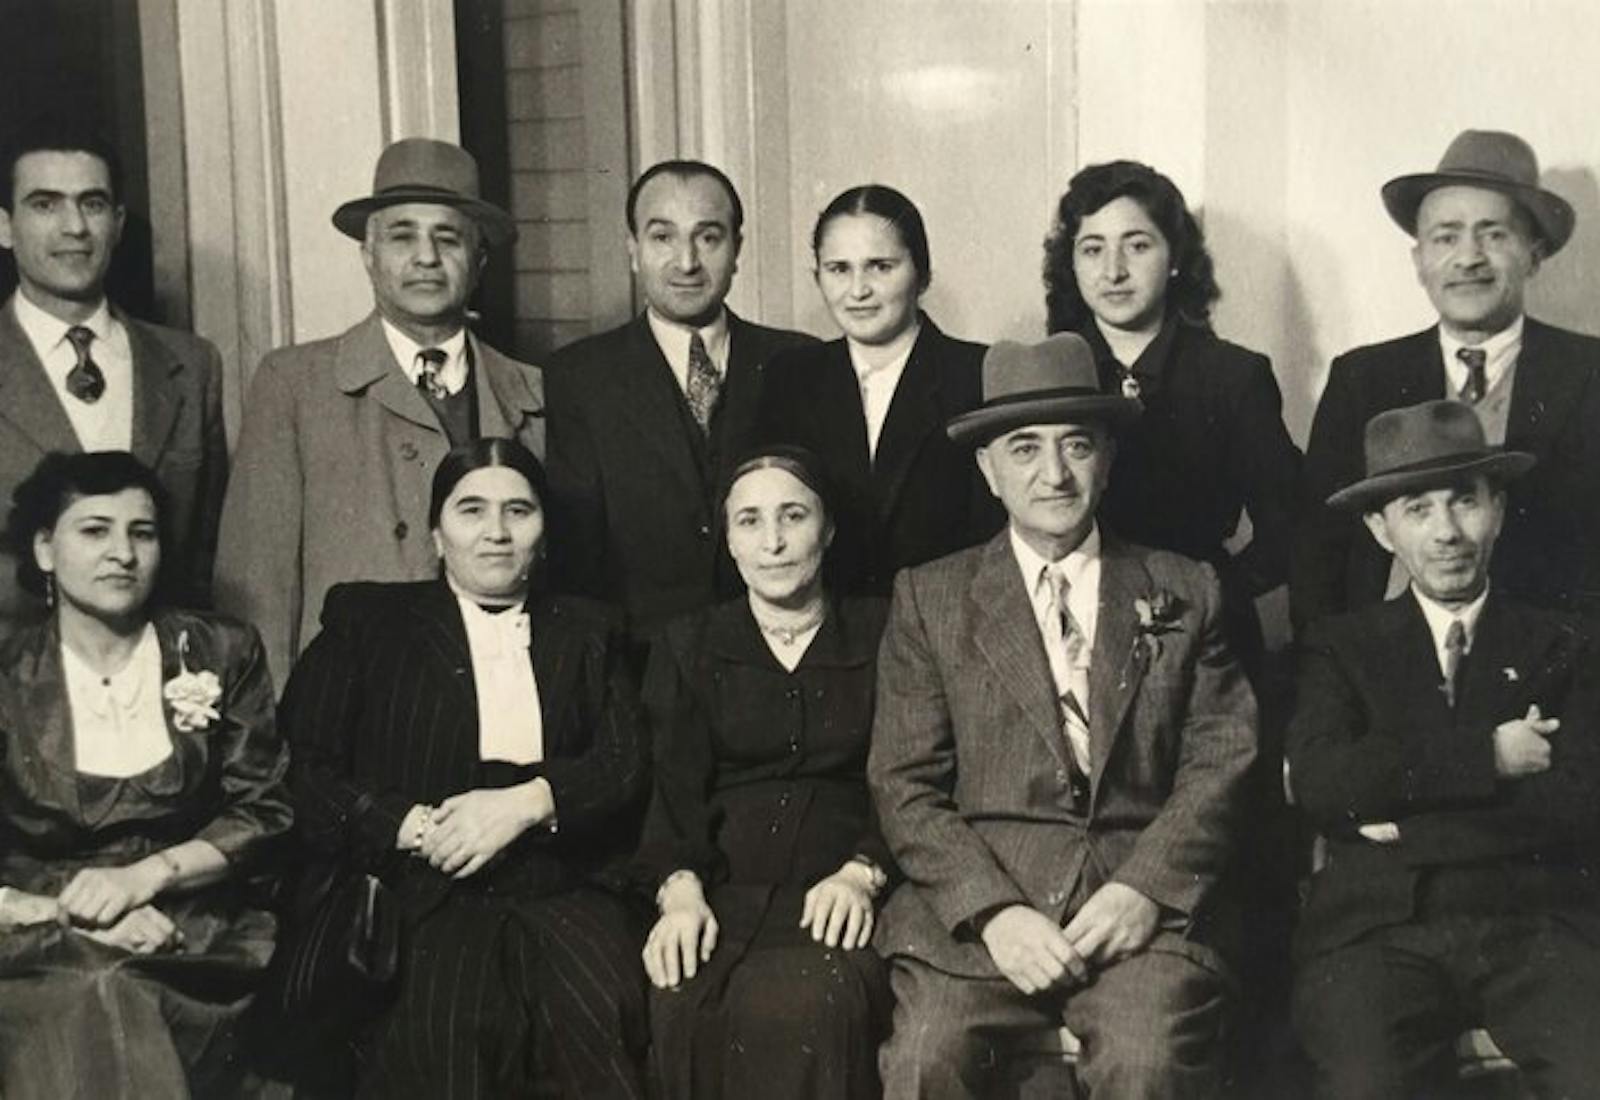 Ilana’s grandfather Hananya (middle-front), Ilana’s grandmother (middle-left), and Ilana’s mother Shulamit (middle-back) in Tel Aviv in the 1940s.